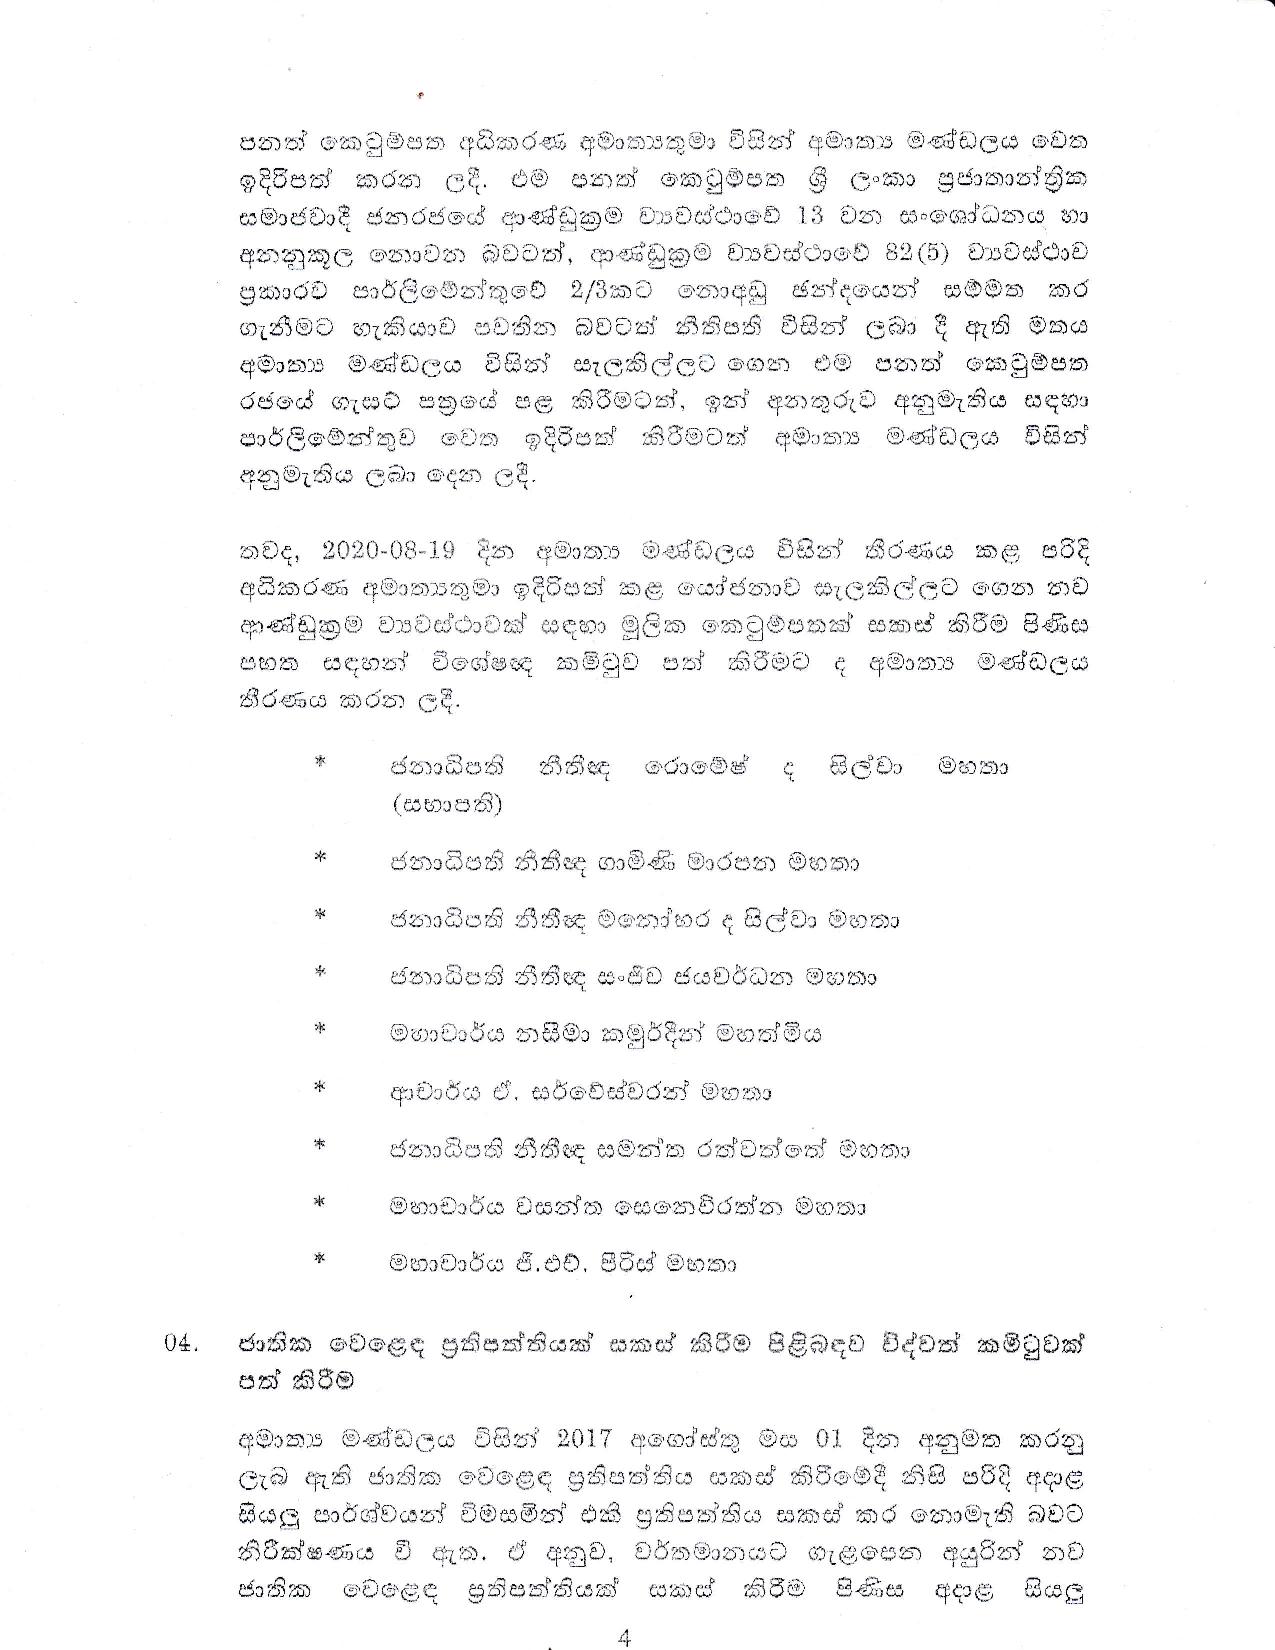 Cabinet Decision on 02.09.2020 Sinhala page 004